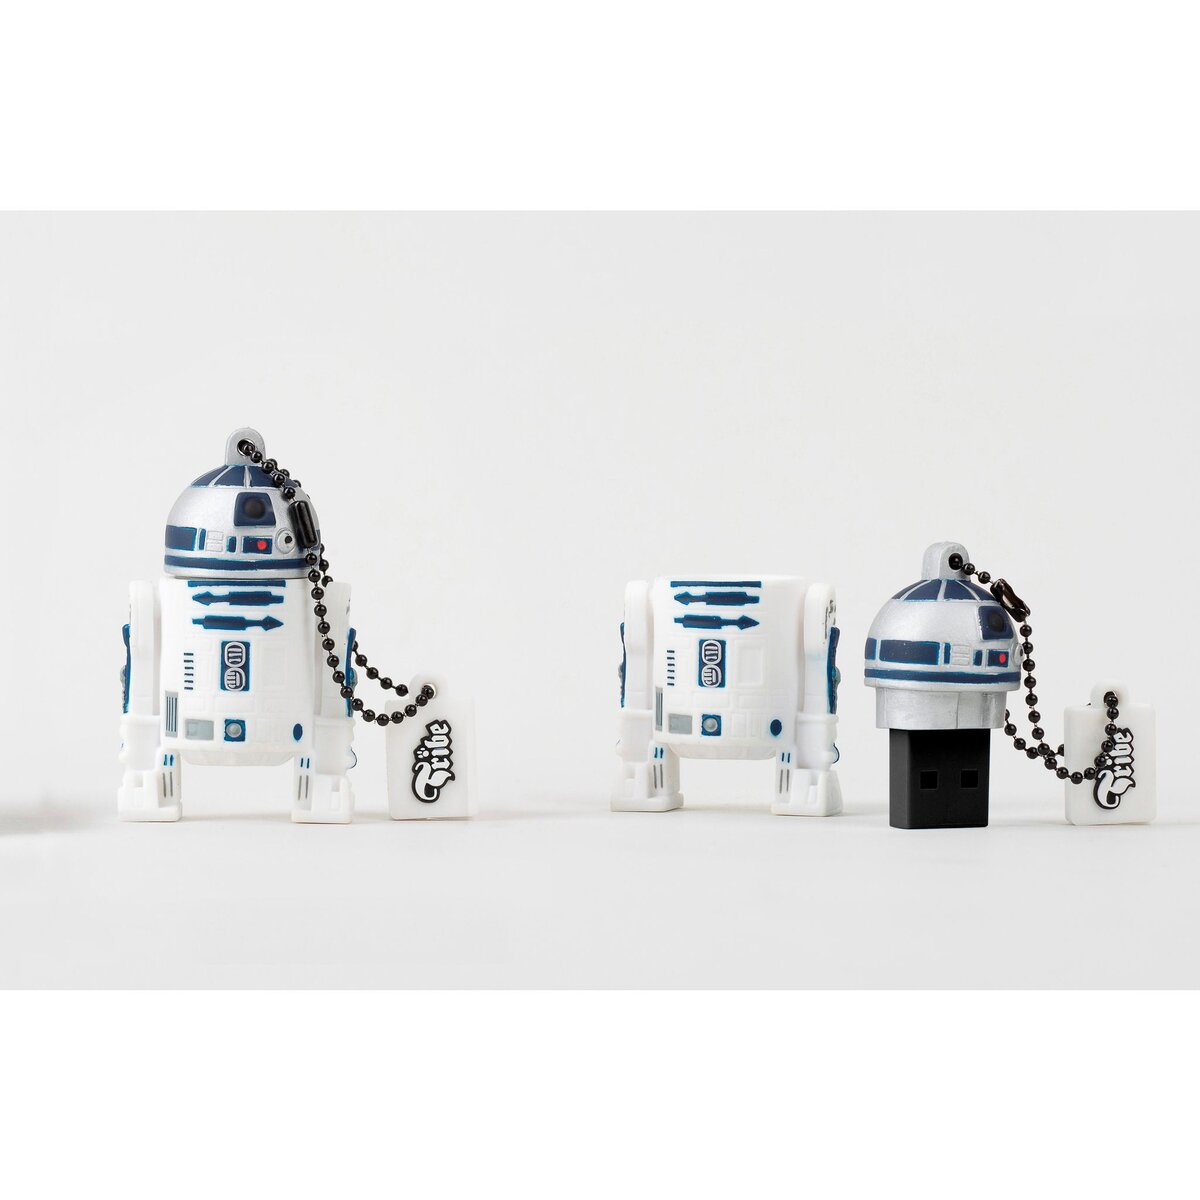 TRIBE Cle 8GO USB R2-D2 TRIBE